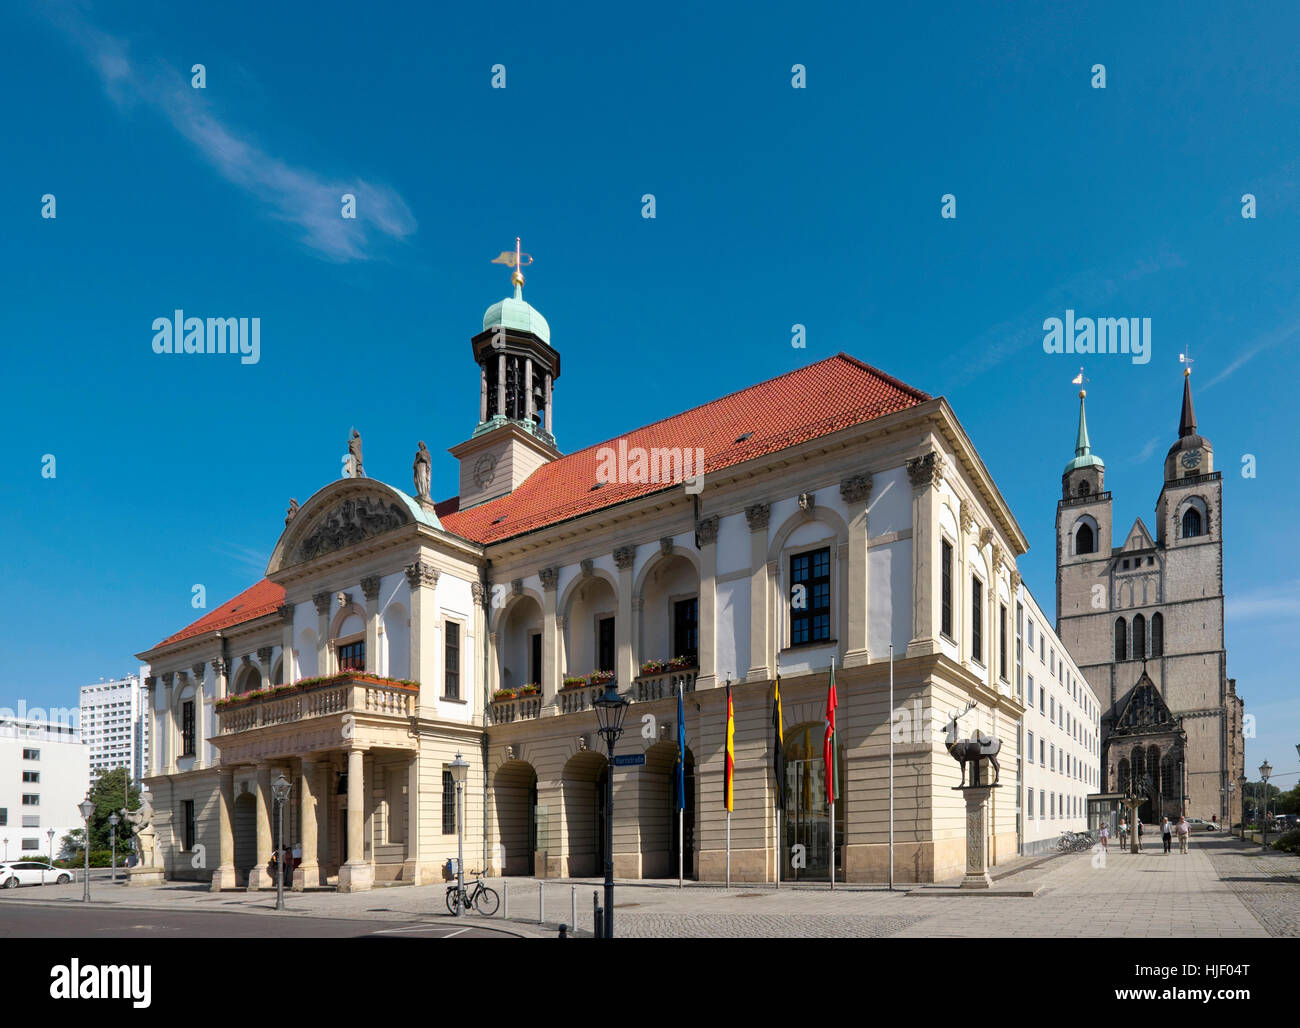 Old Town Hall, Old Market, St John's Church at back, Magdeburg, Saxony-Anhalt, Germany Stock Photo